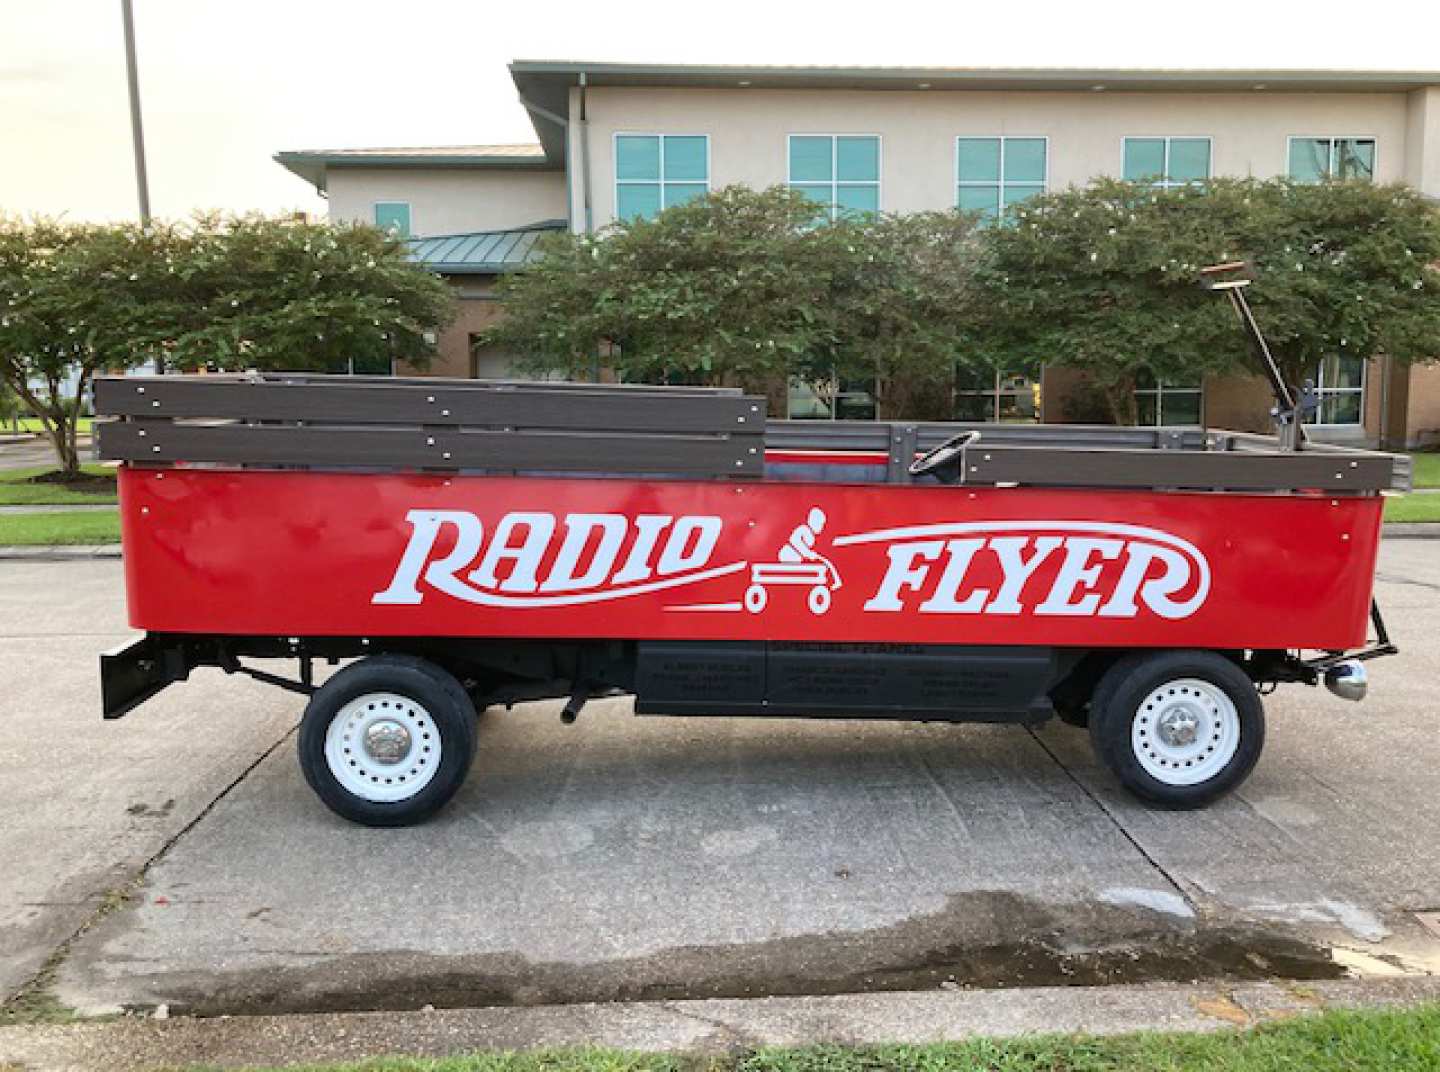 3rd Image of a 1993 FORD RADIO FLYER